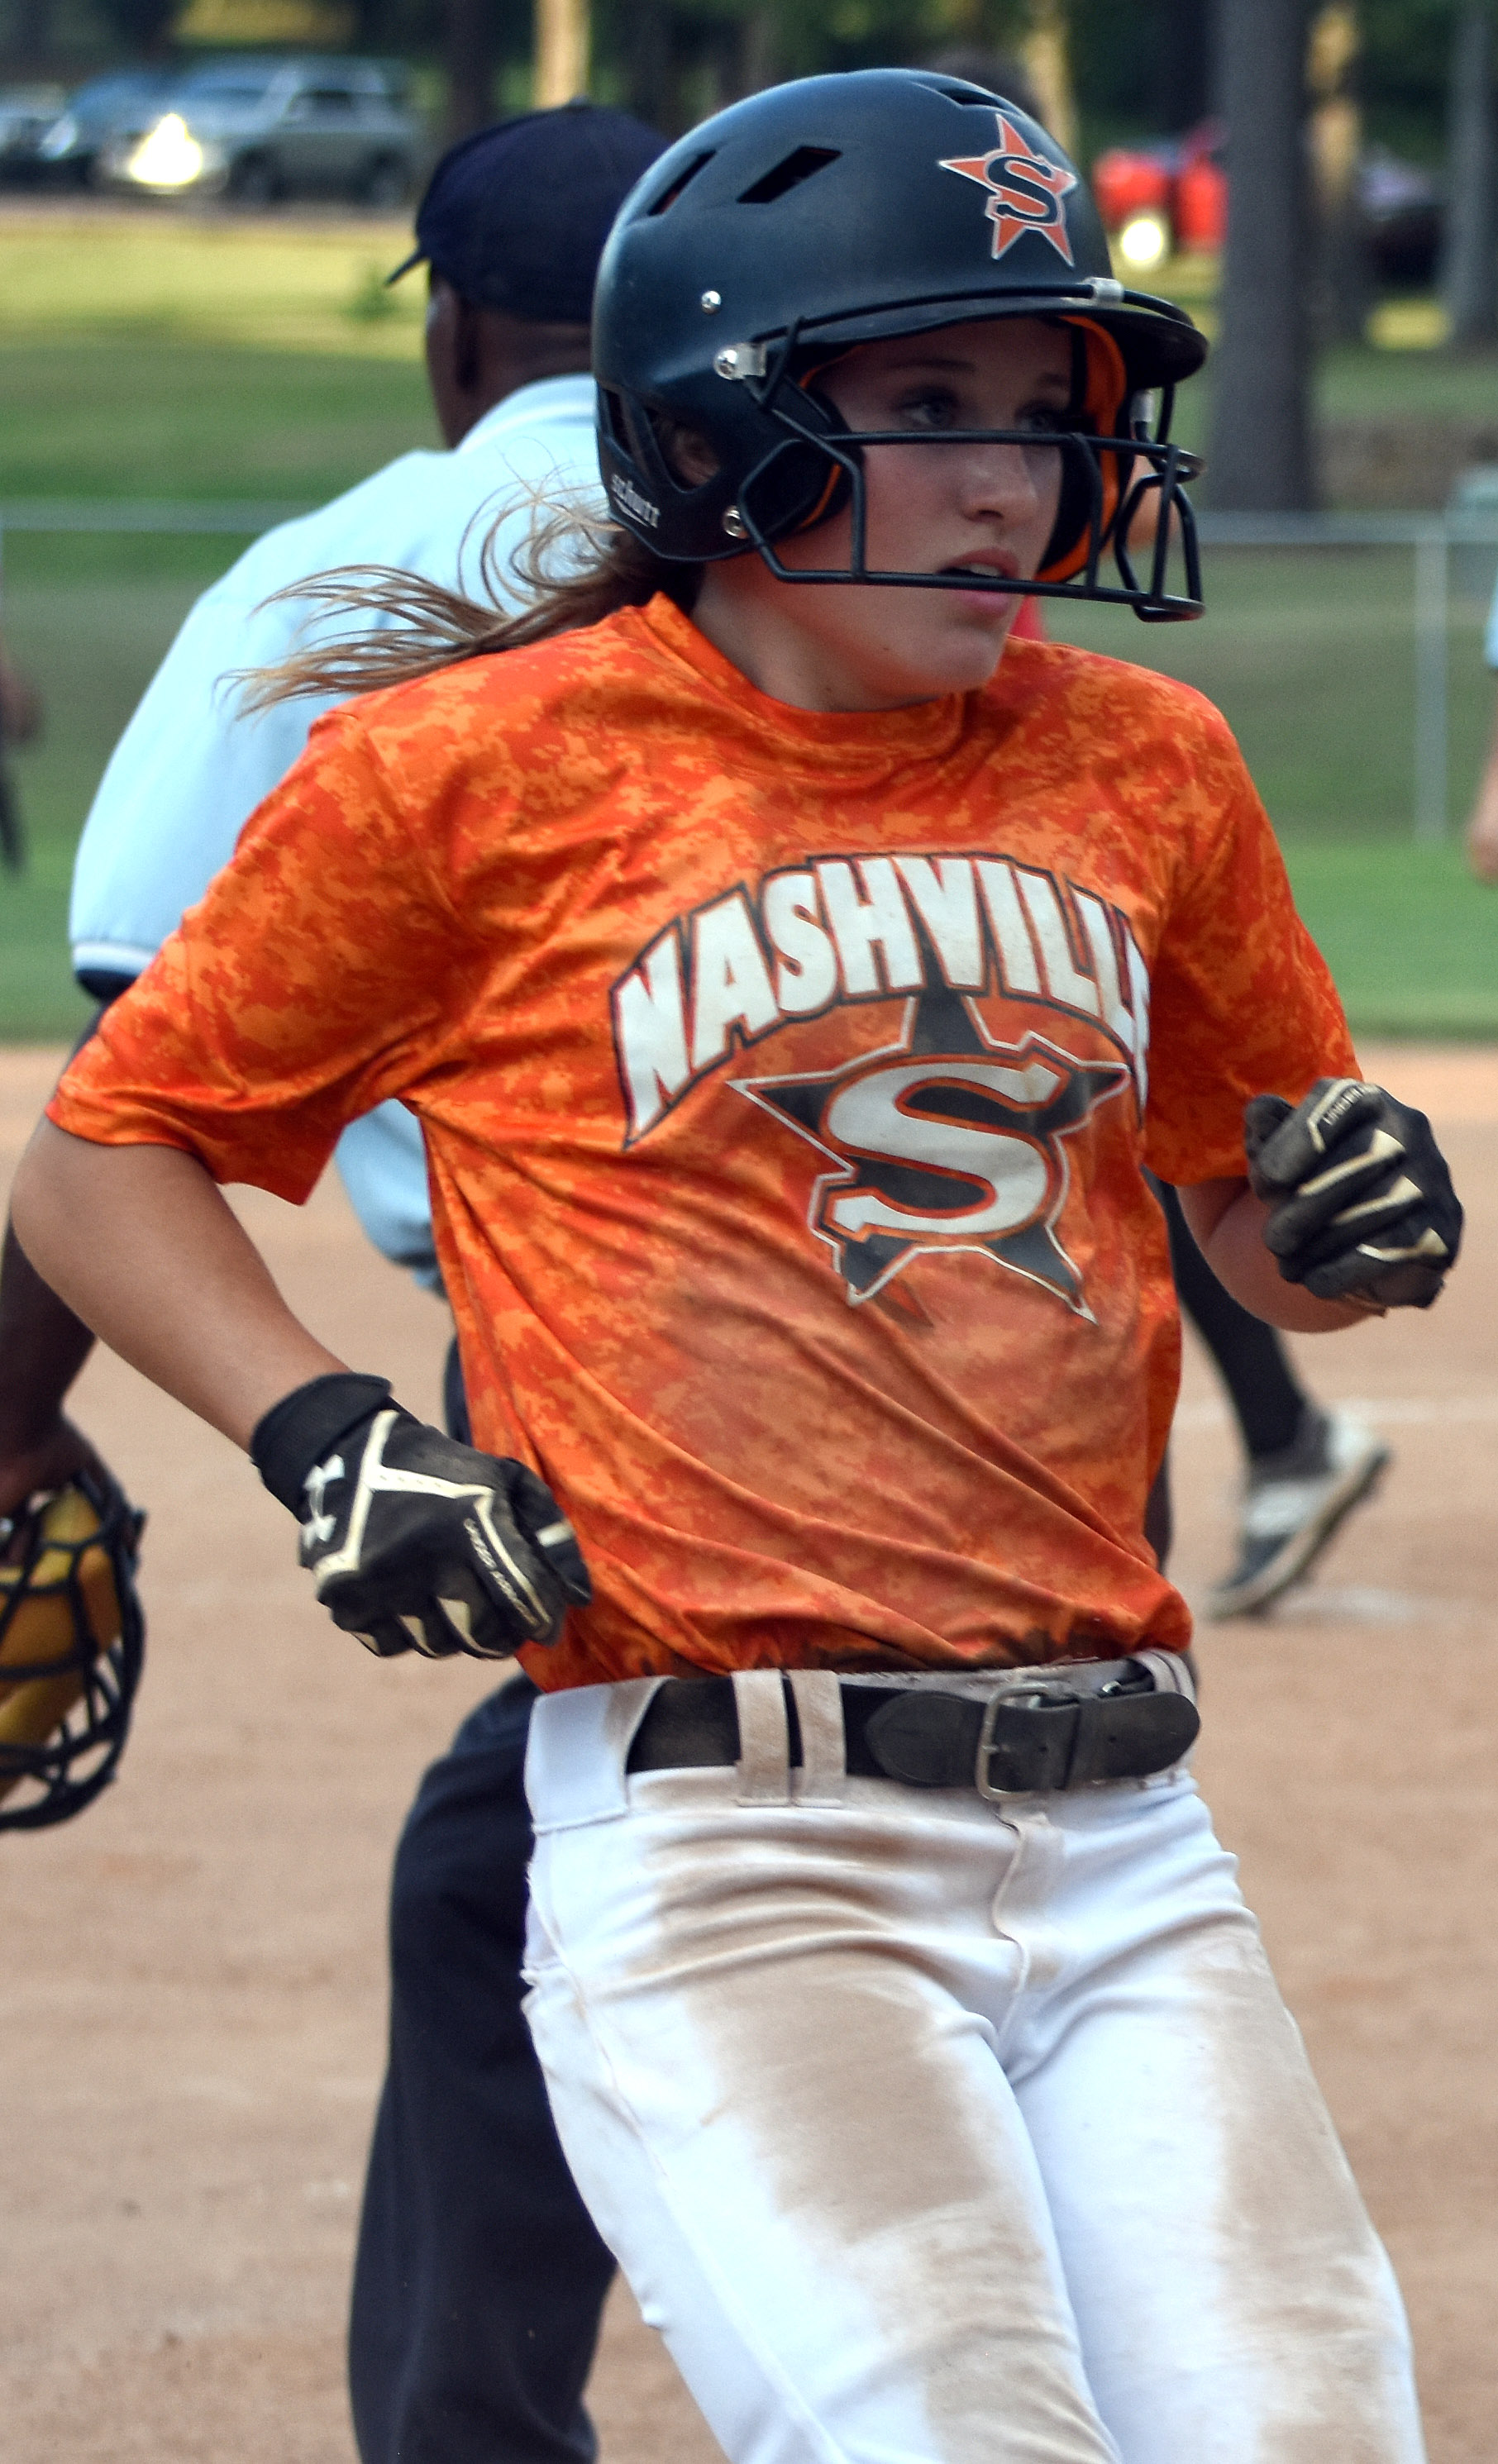 Julianne Futrell crosses home plate to put up a run for Nashville during fall ball Sept. 13 at the Nashville City Park. The final night of fall ball will be Sept. 27.